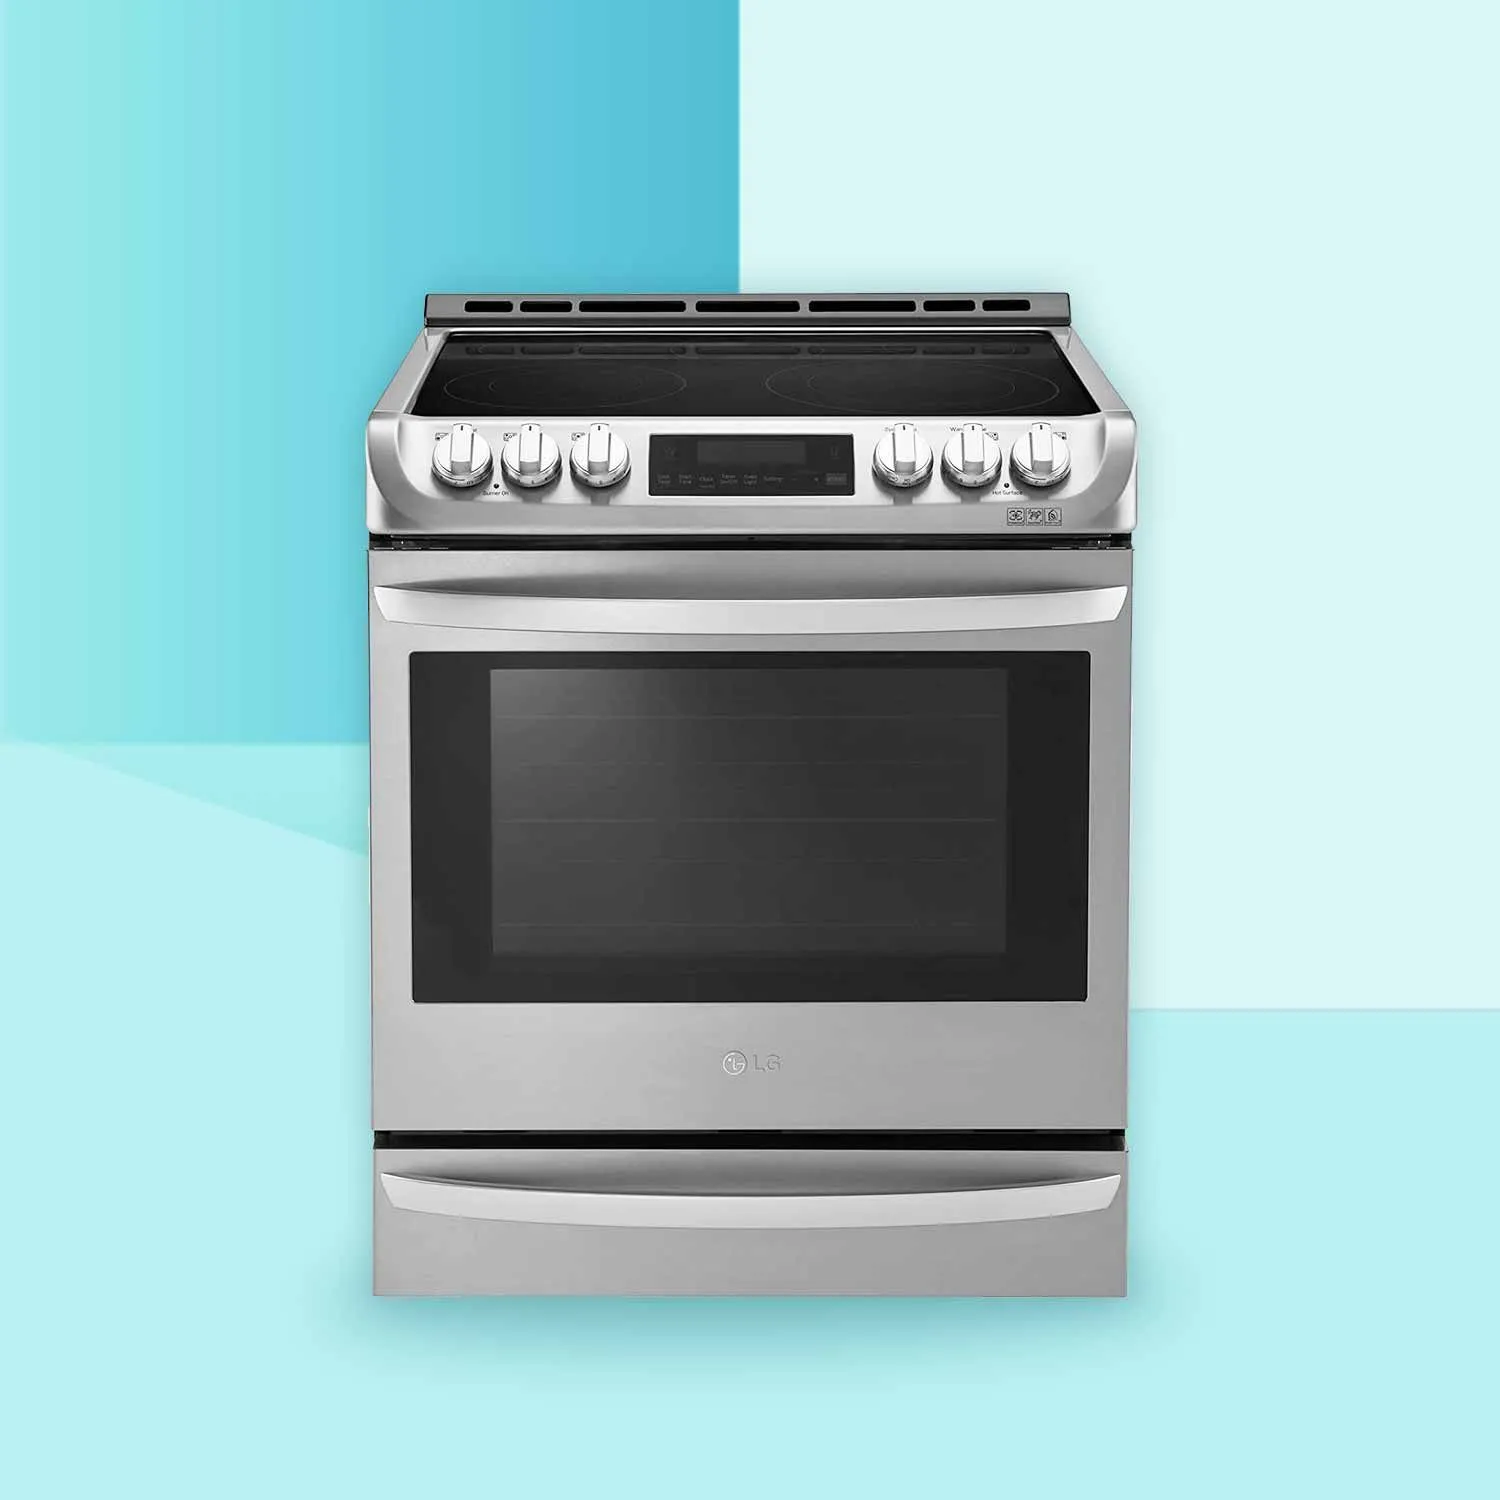 Best Electric Ranges in 2021 - Buyers Guide & Reviews